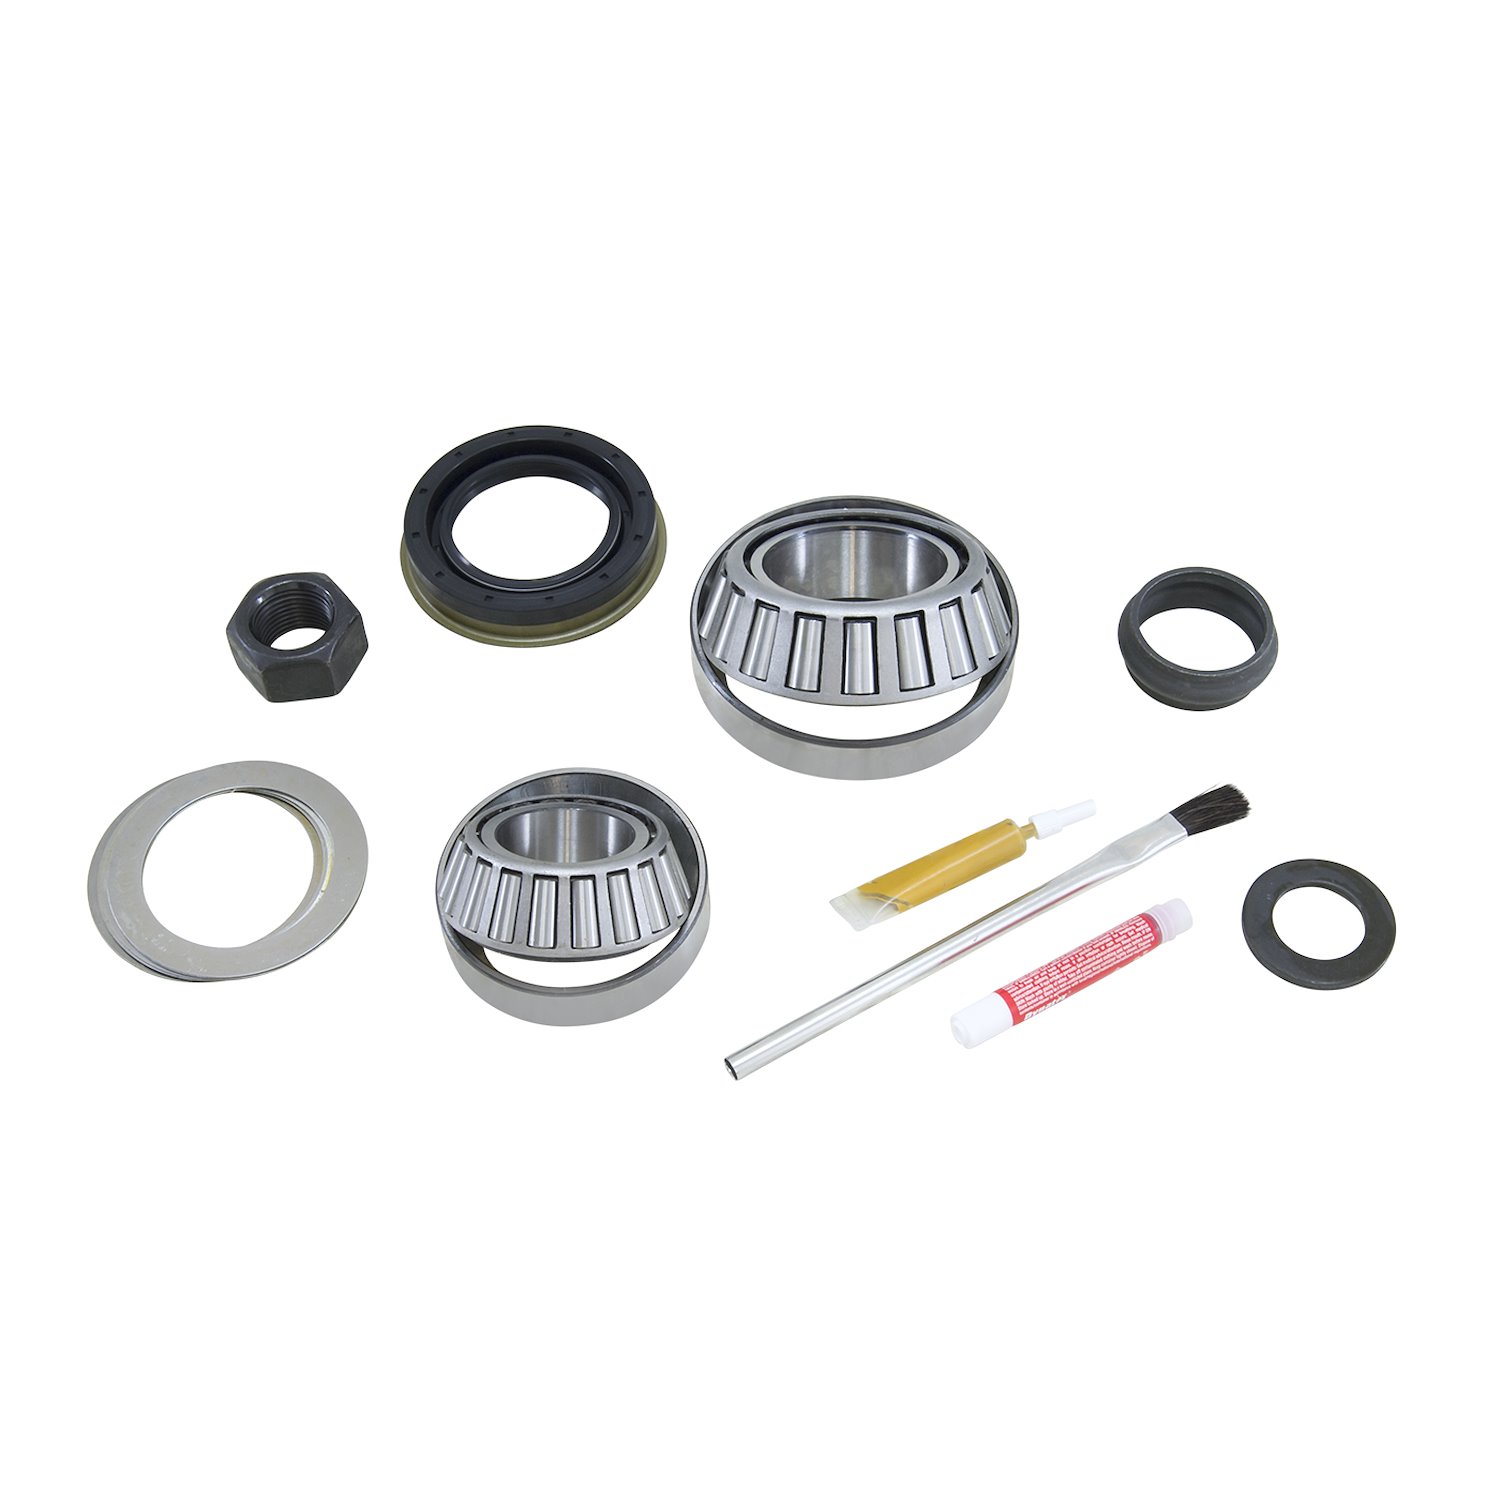 Pinion Install Kit For '92 And Newer Dana 44 Ifs Differential